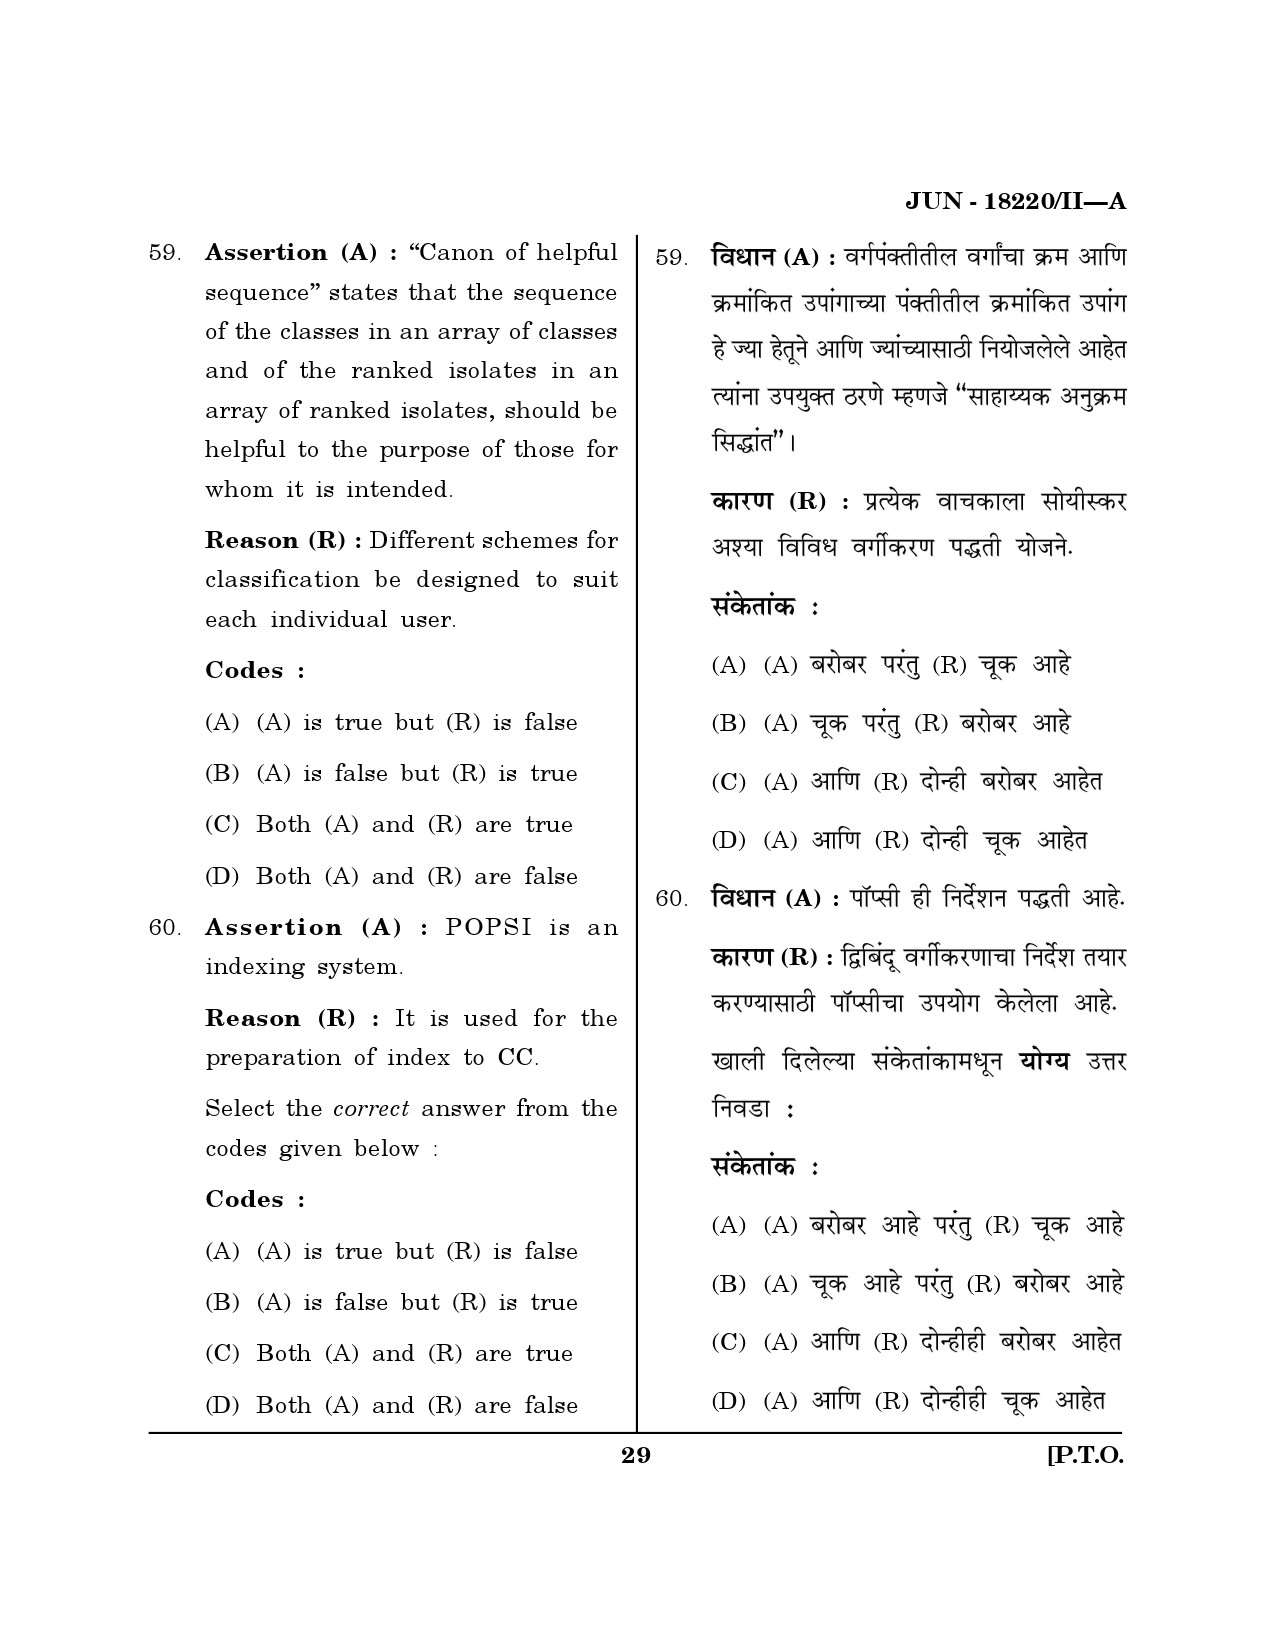 Maharashtra SET Library Information Science Question Paper II June 2020 28